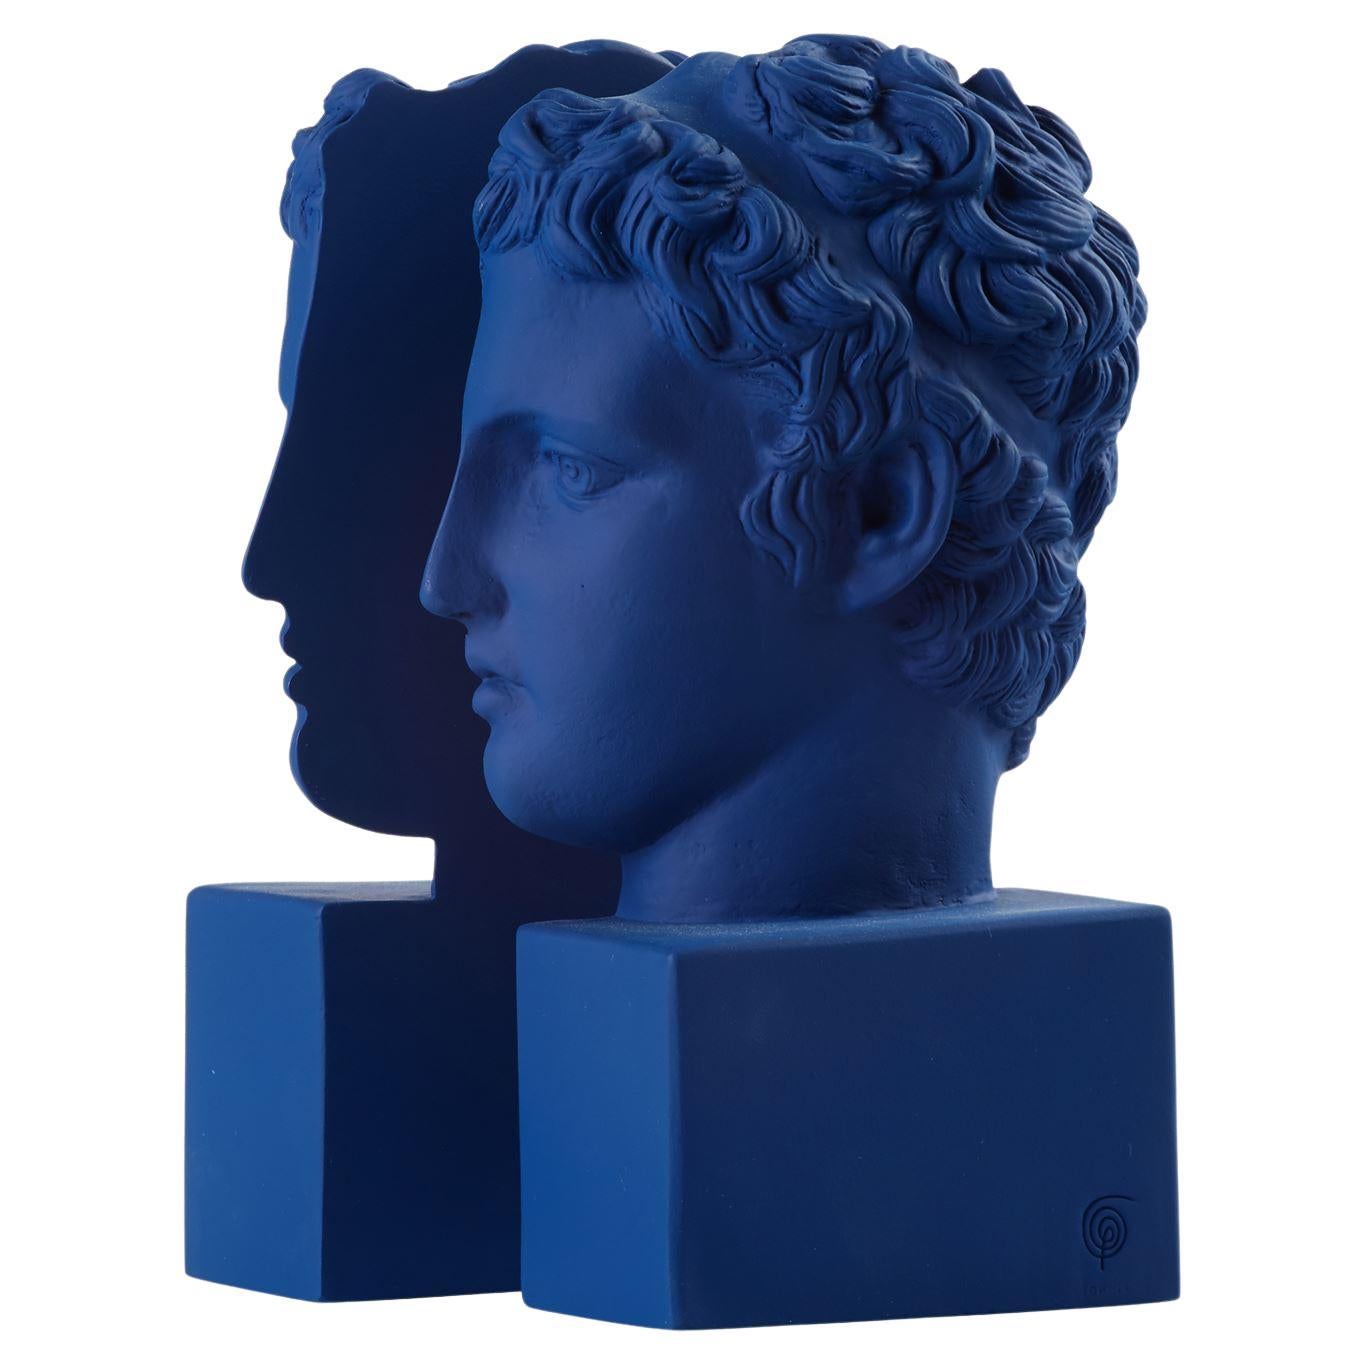 In Stock in Los Angeles, Marathon Boy Set of 2 Bookends in Blue